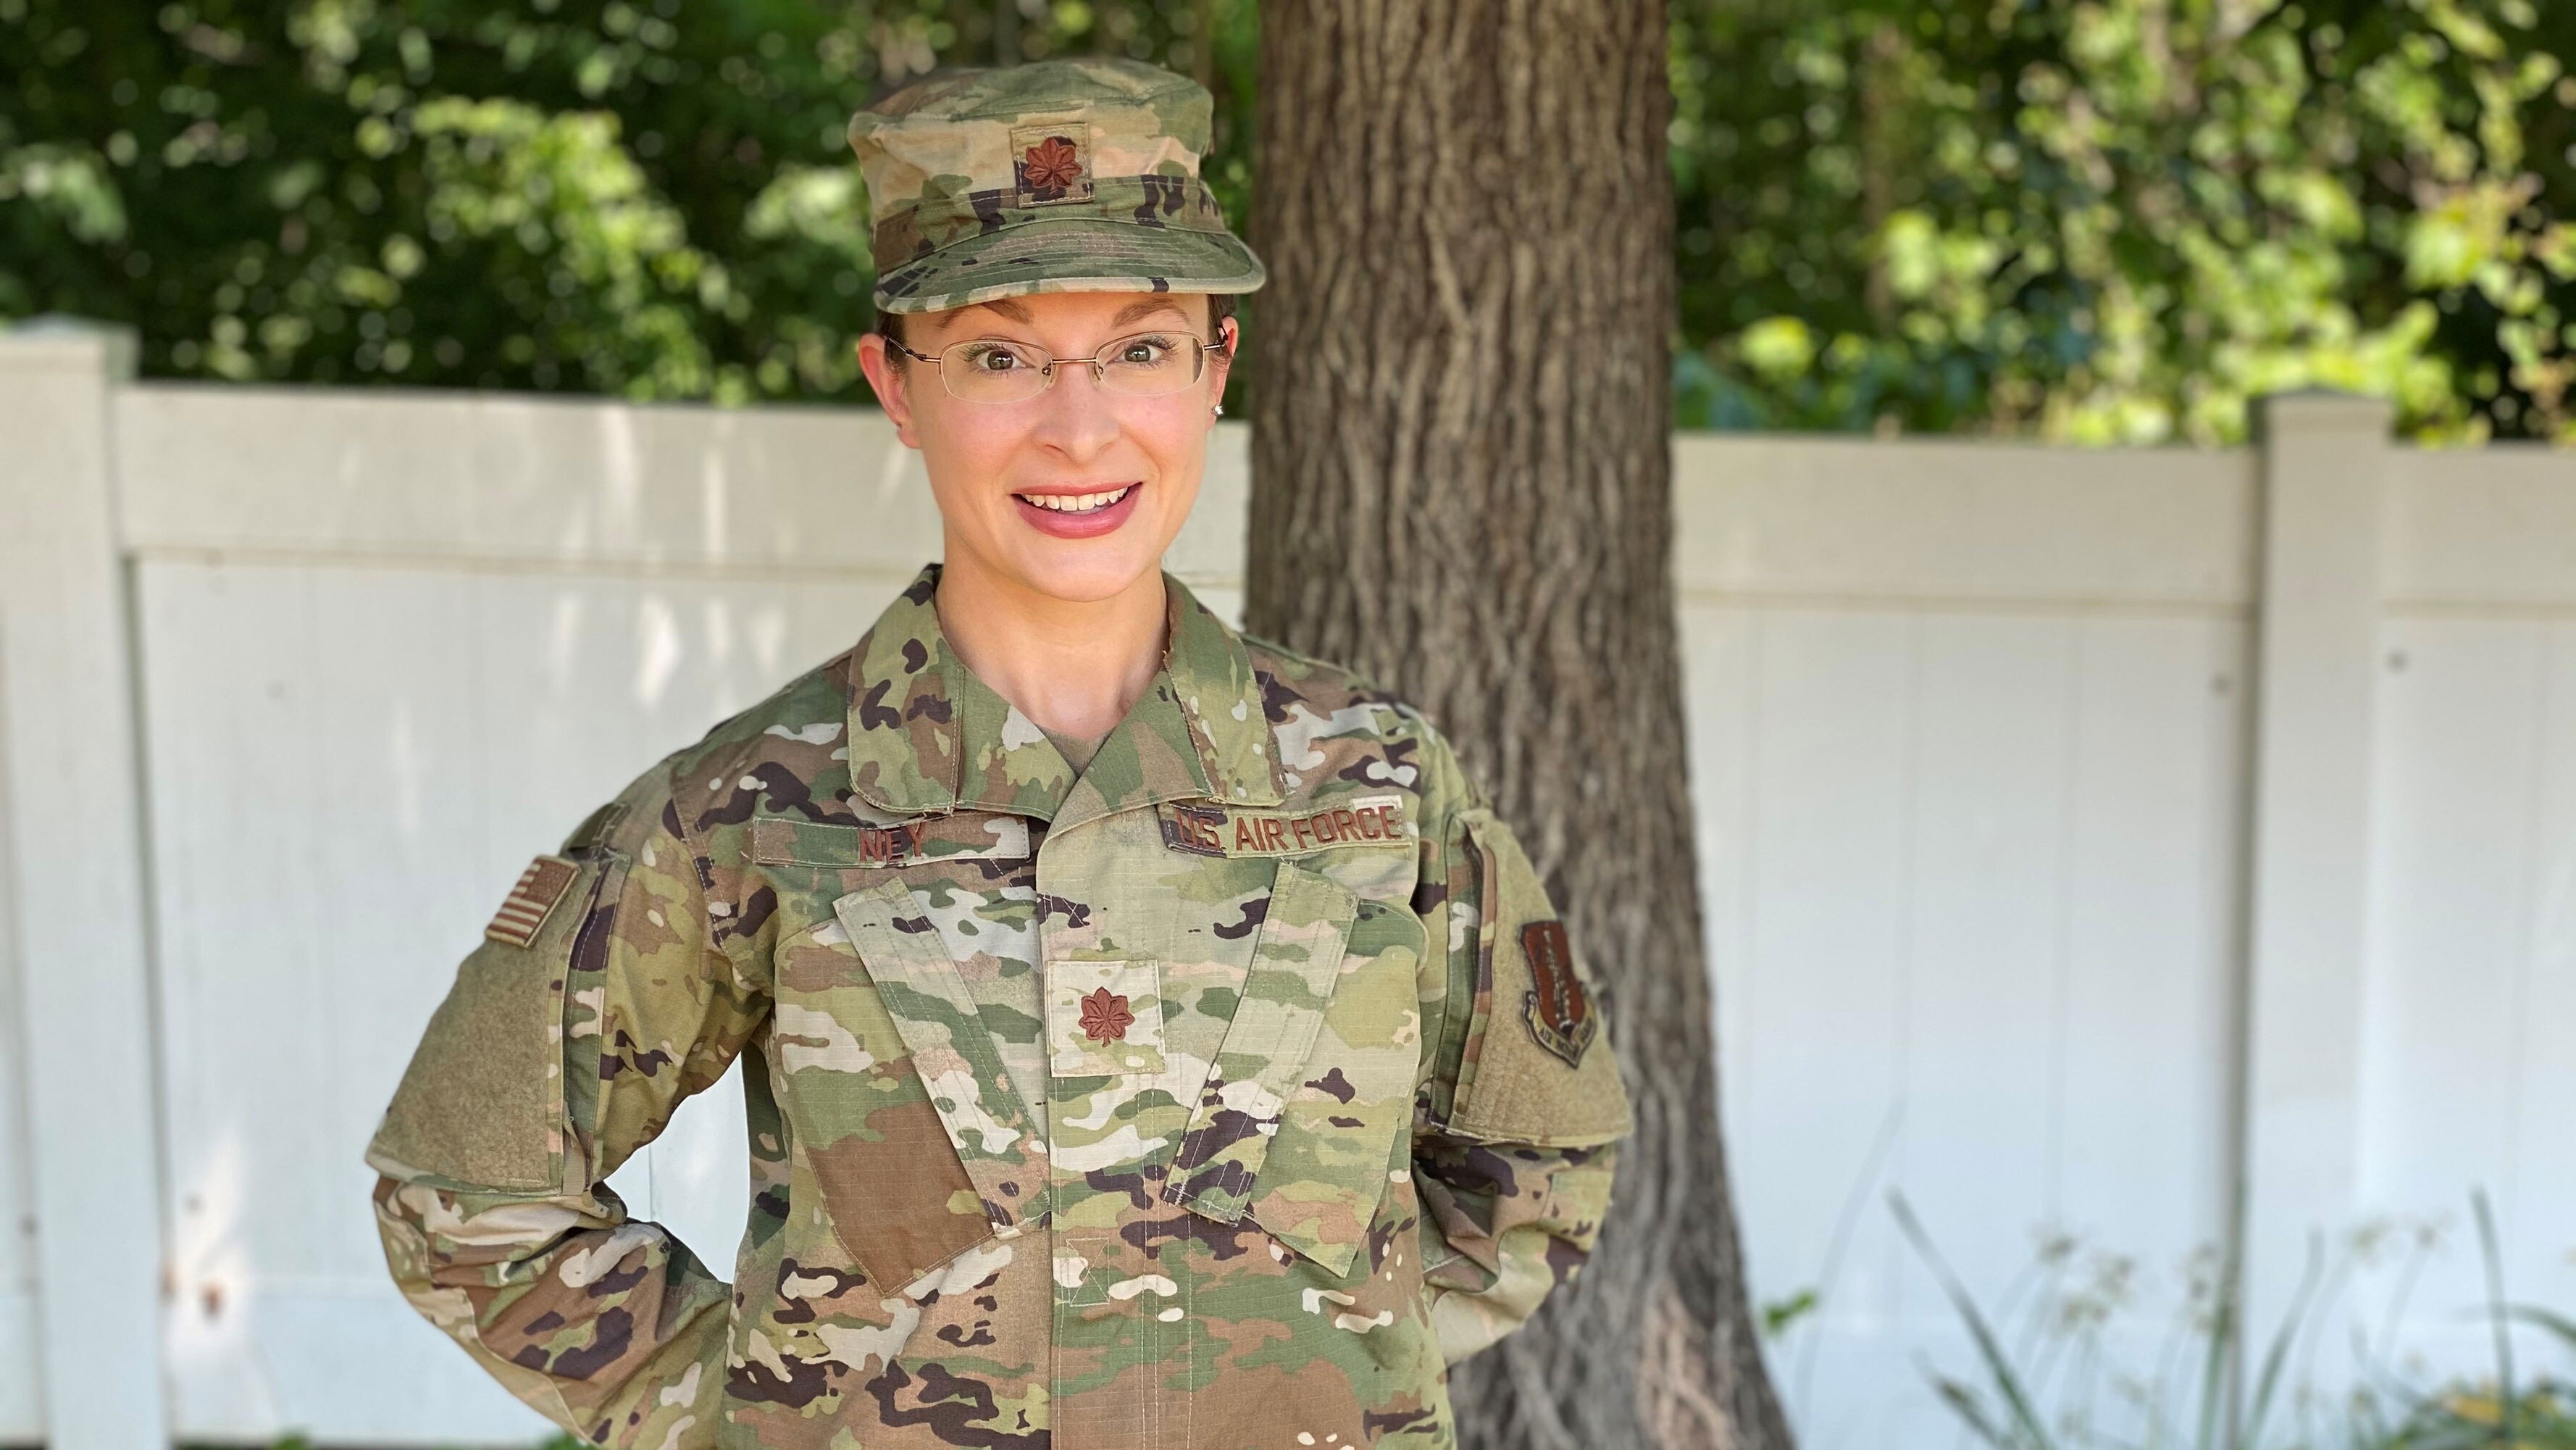 Major Alison Ney stands at-ease in her fatigues.